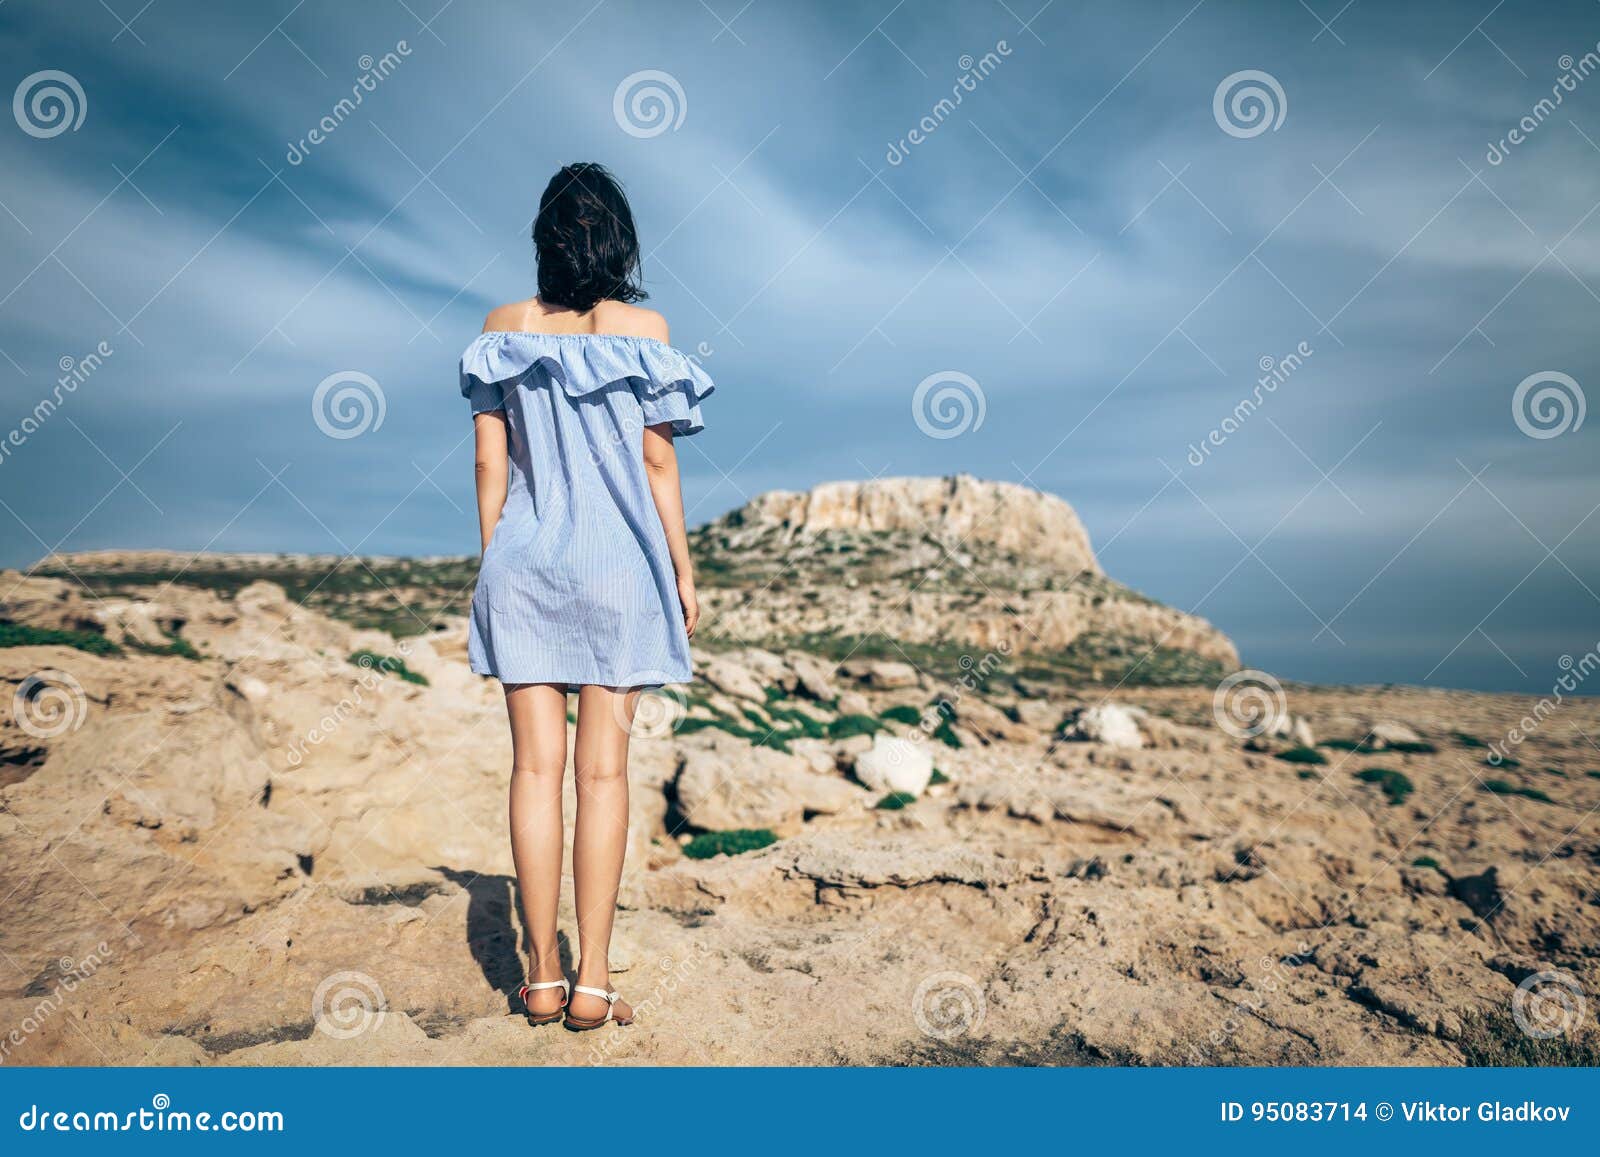 Back View of Lonely Woman Standing on Rocky Desert Stock Photo - Image ...